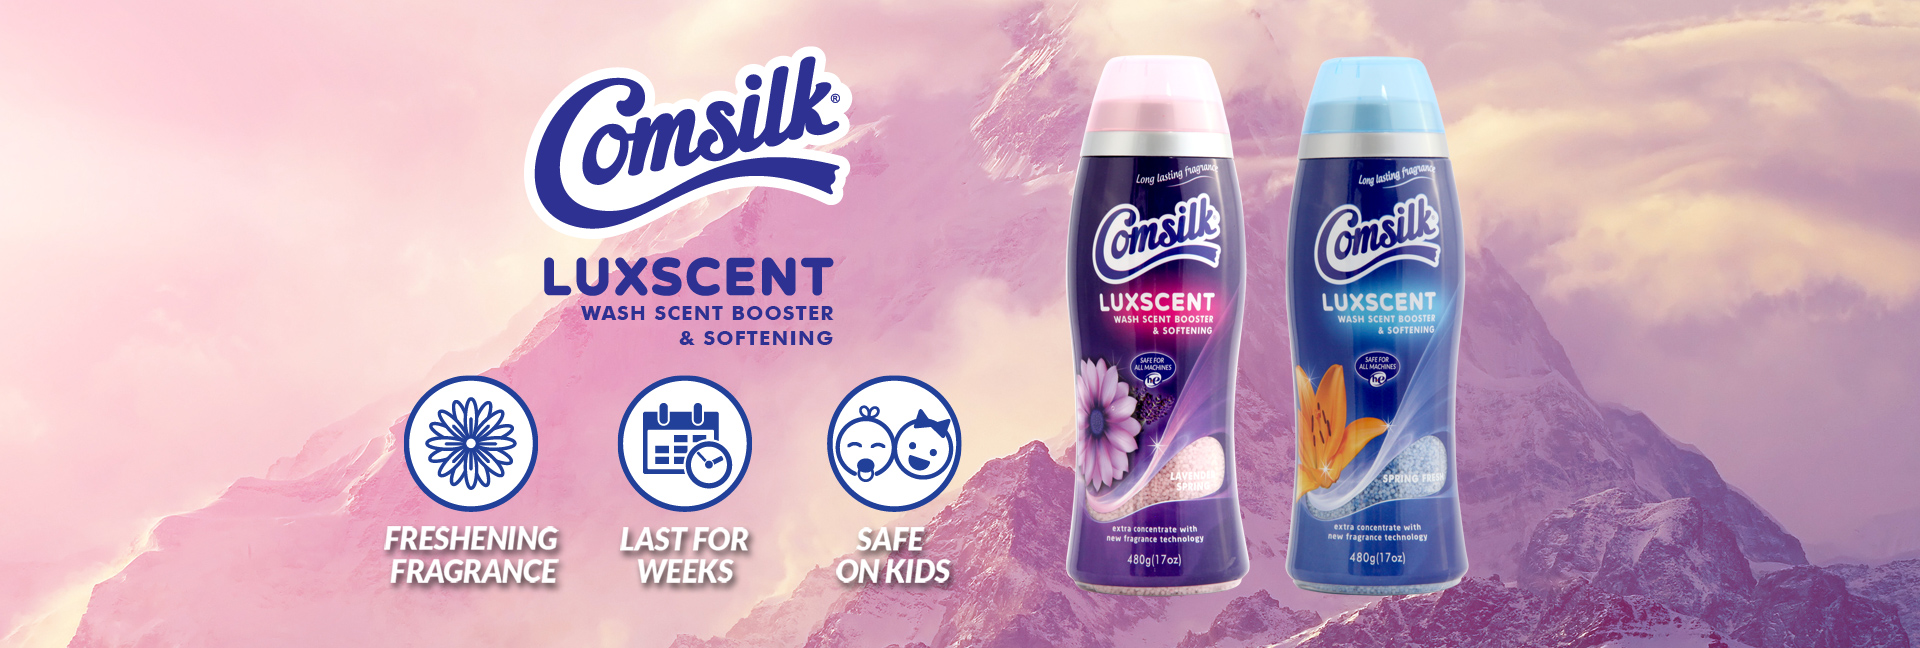 COMSILK LUXSCENT SPRING FRESH 480G WASH SCENT BOOSTER & SOFTENING SOFTENER 